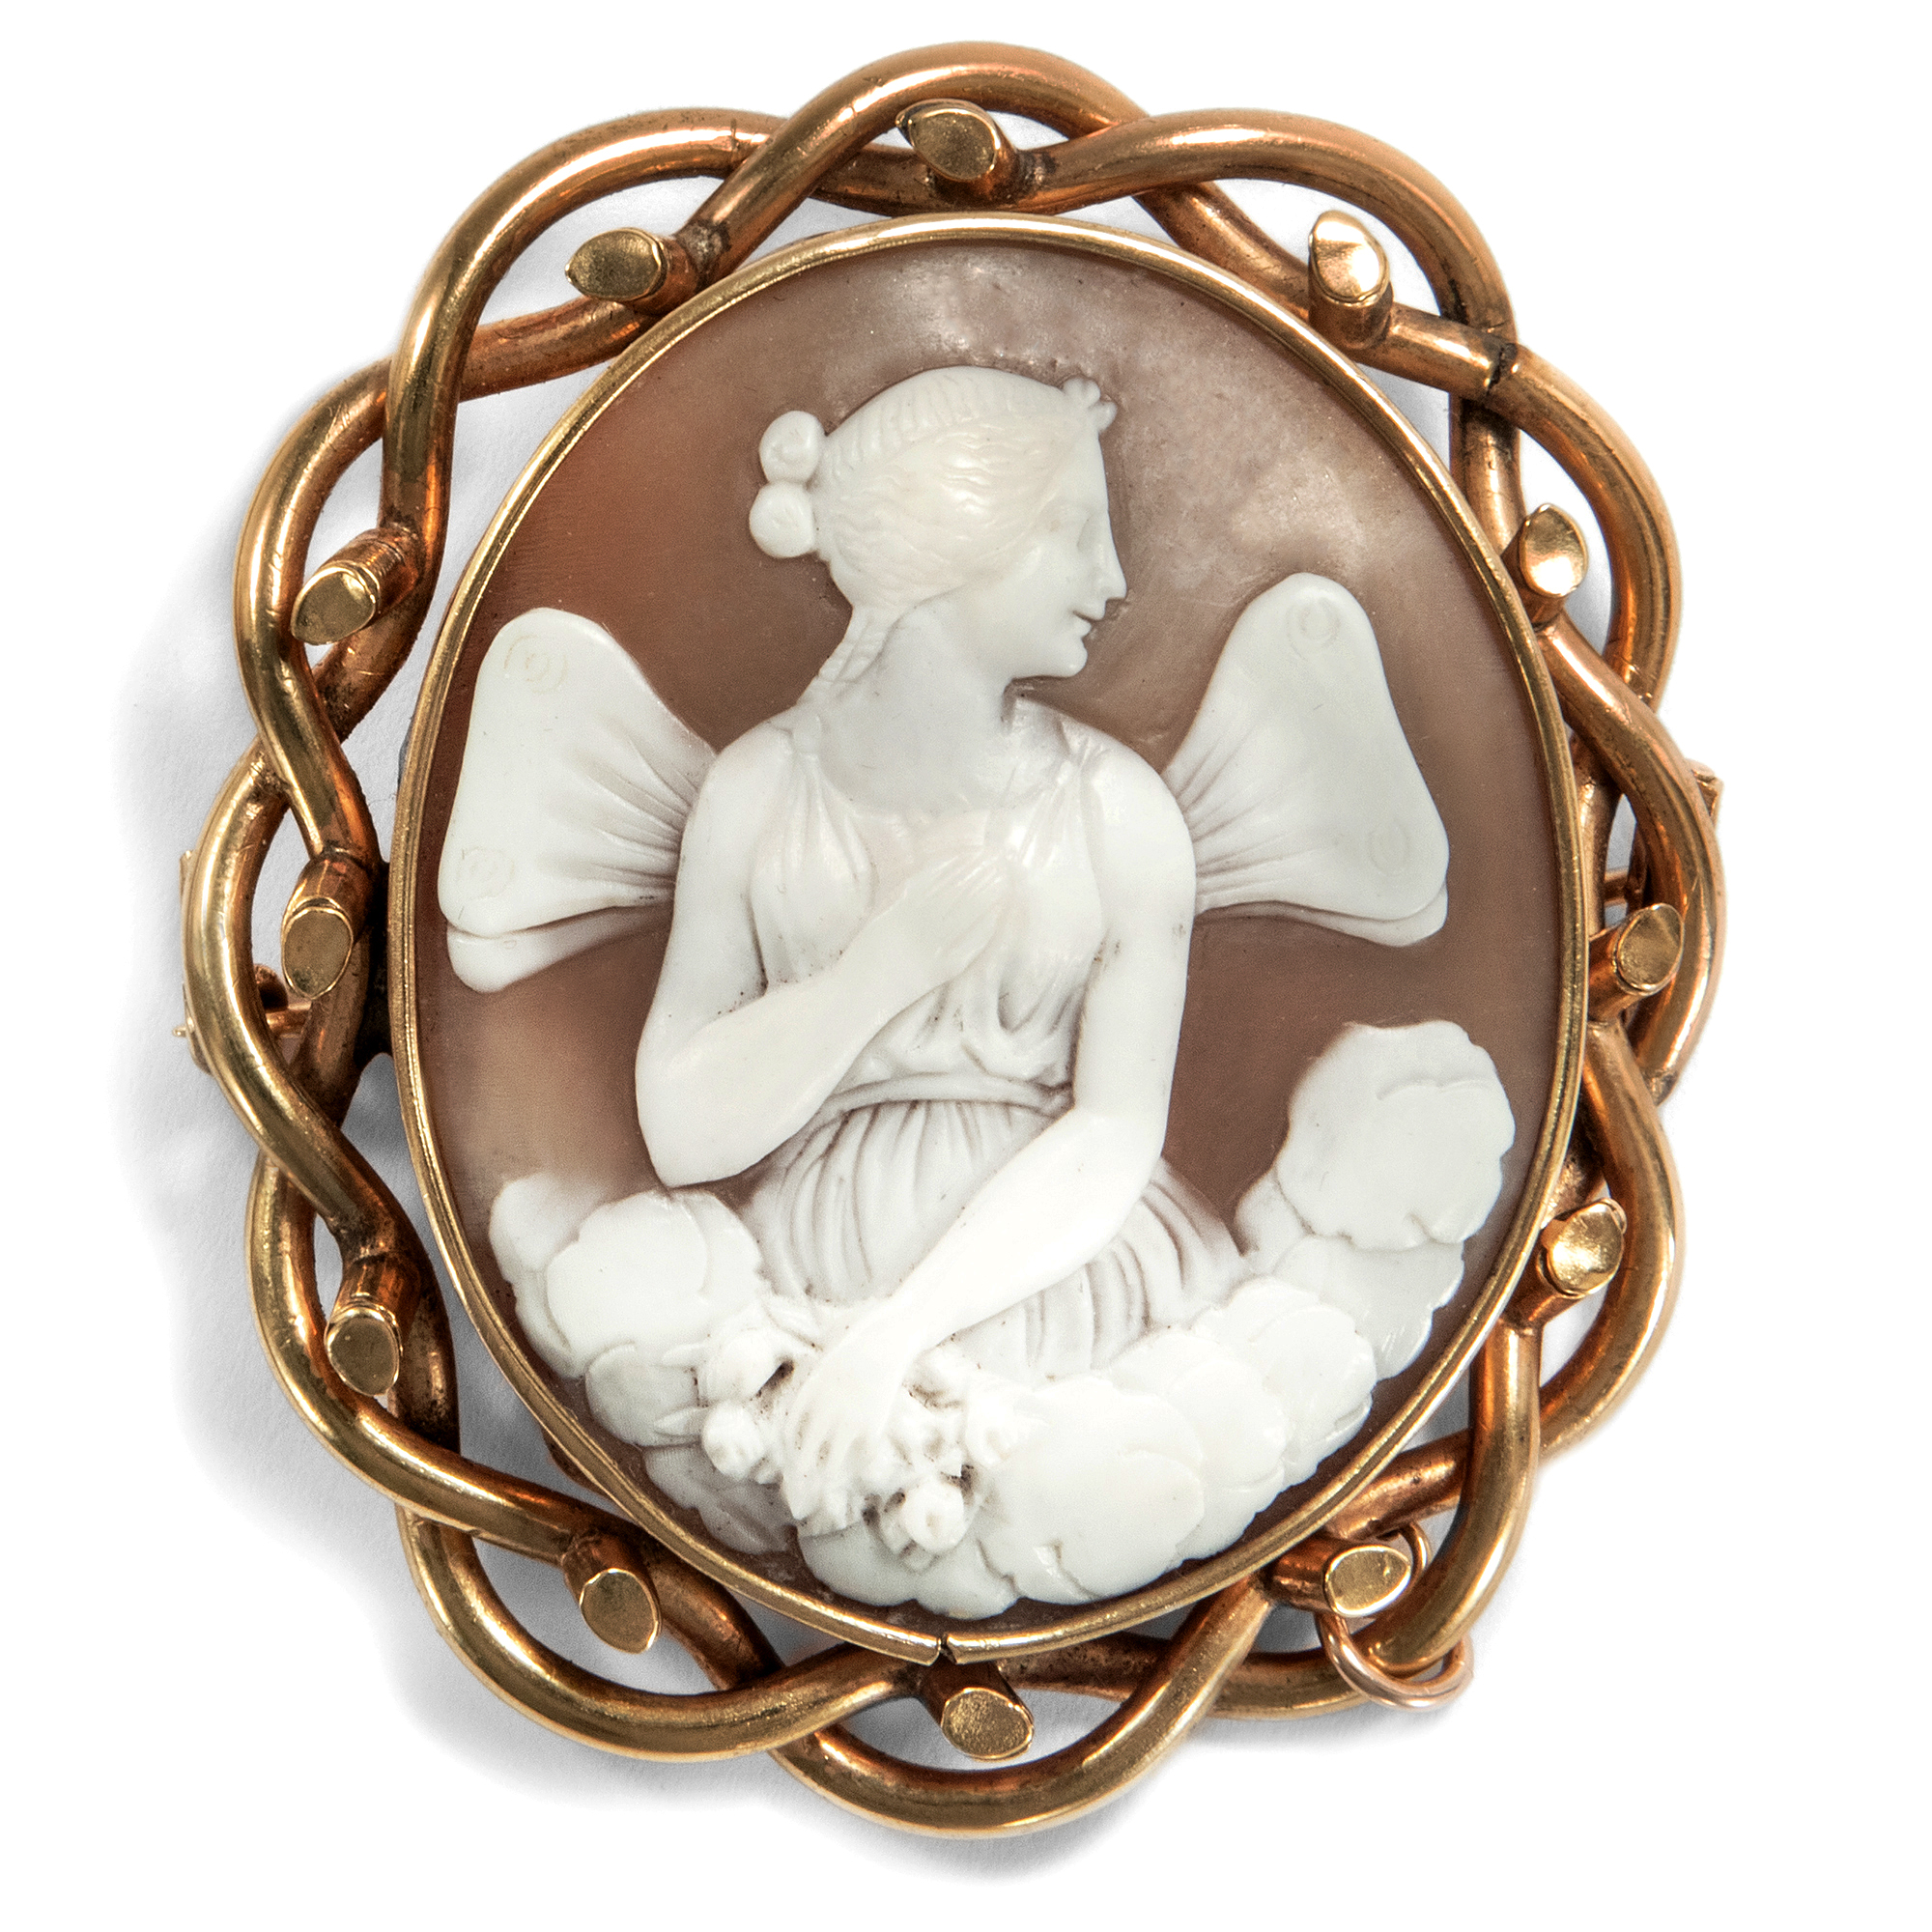 Large shell cameo with representation of Psyche as brooch, around 1850